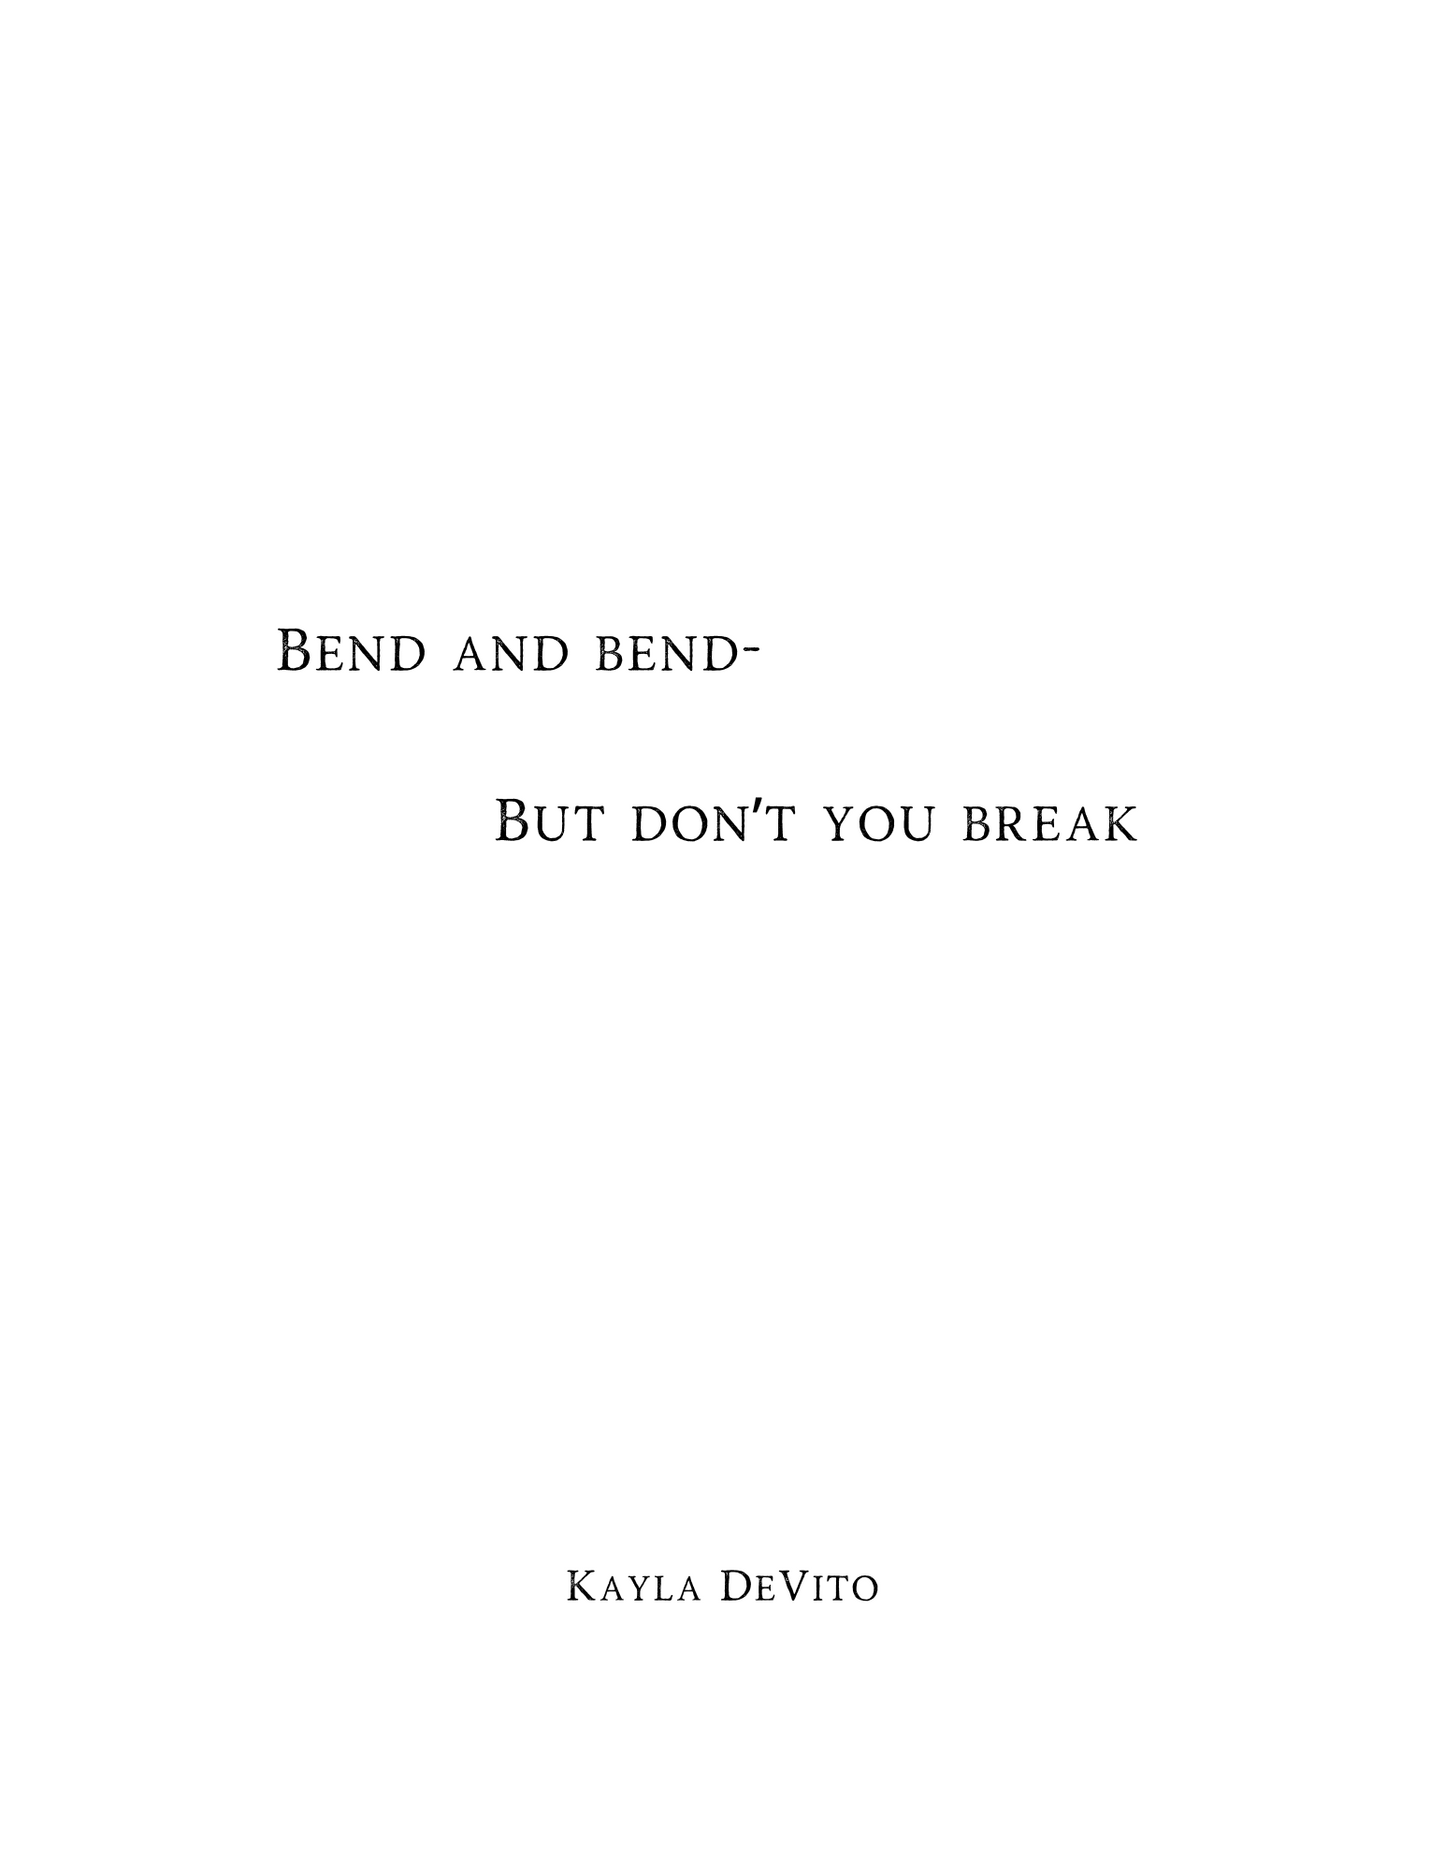 "Bend and Bend (But Don't You Break)" Limited Edition Fine Art Print